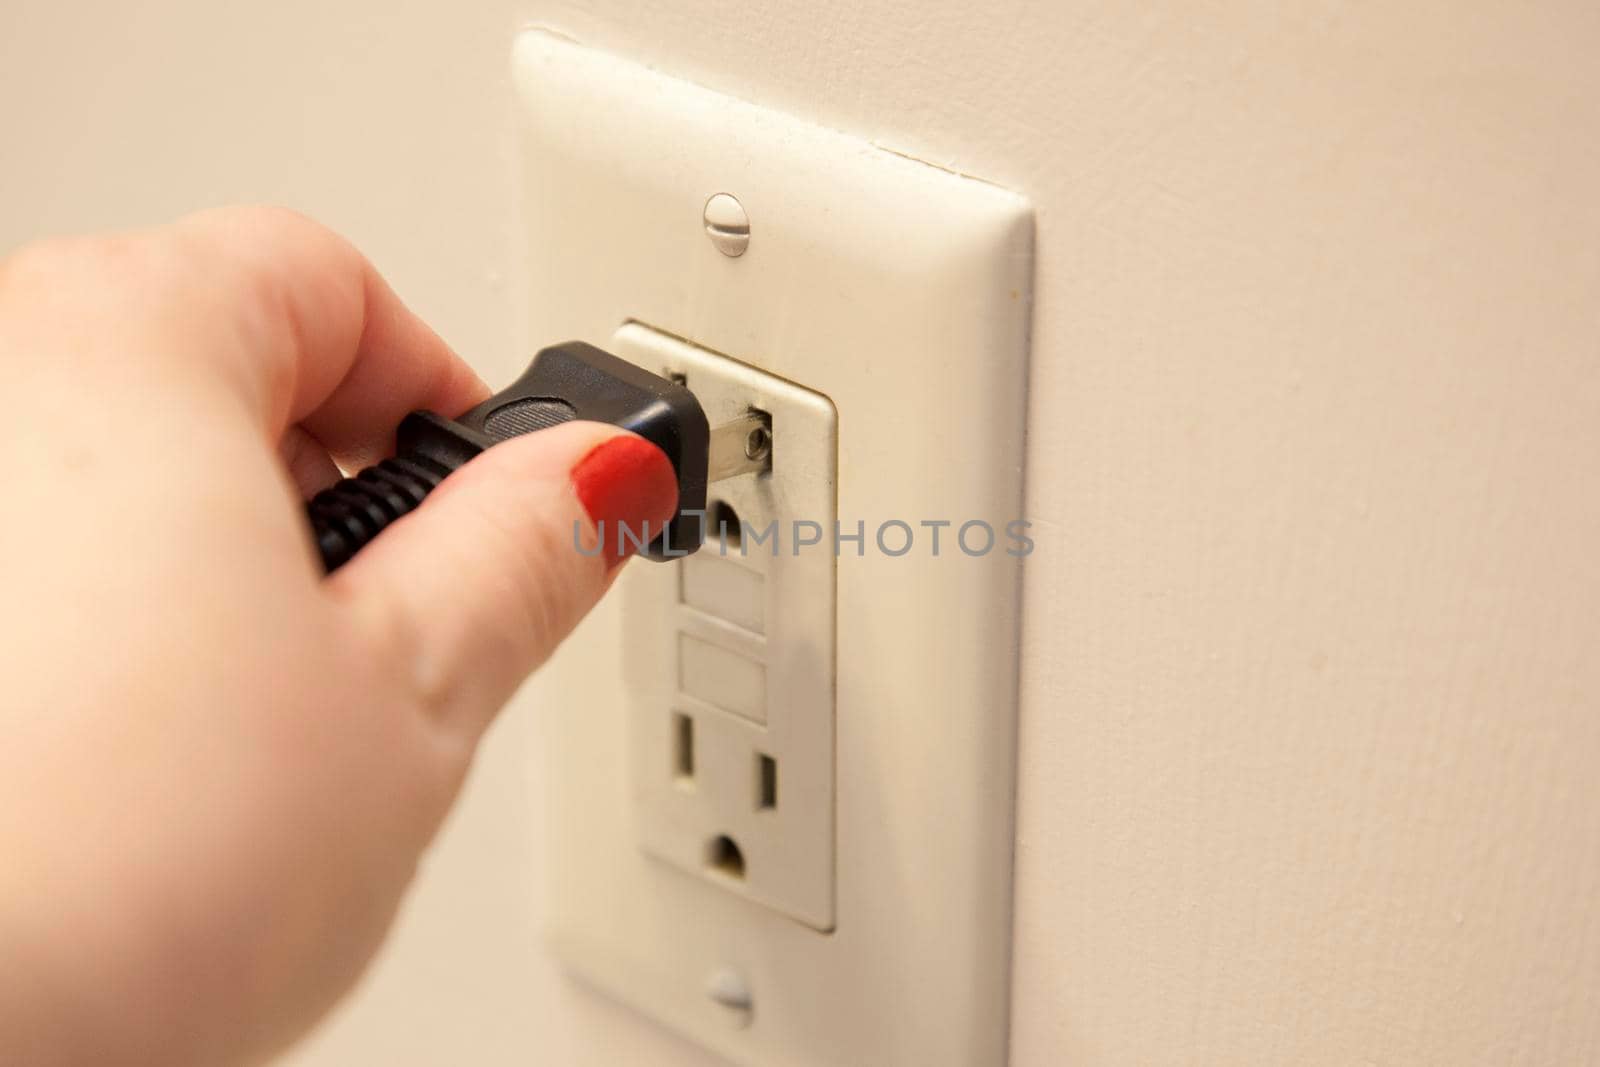 Hand plugging or unplugging a cord into an outlet